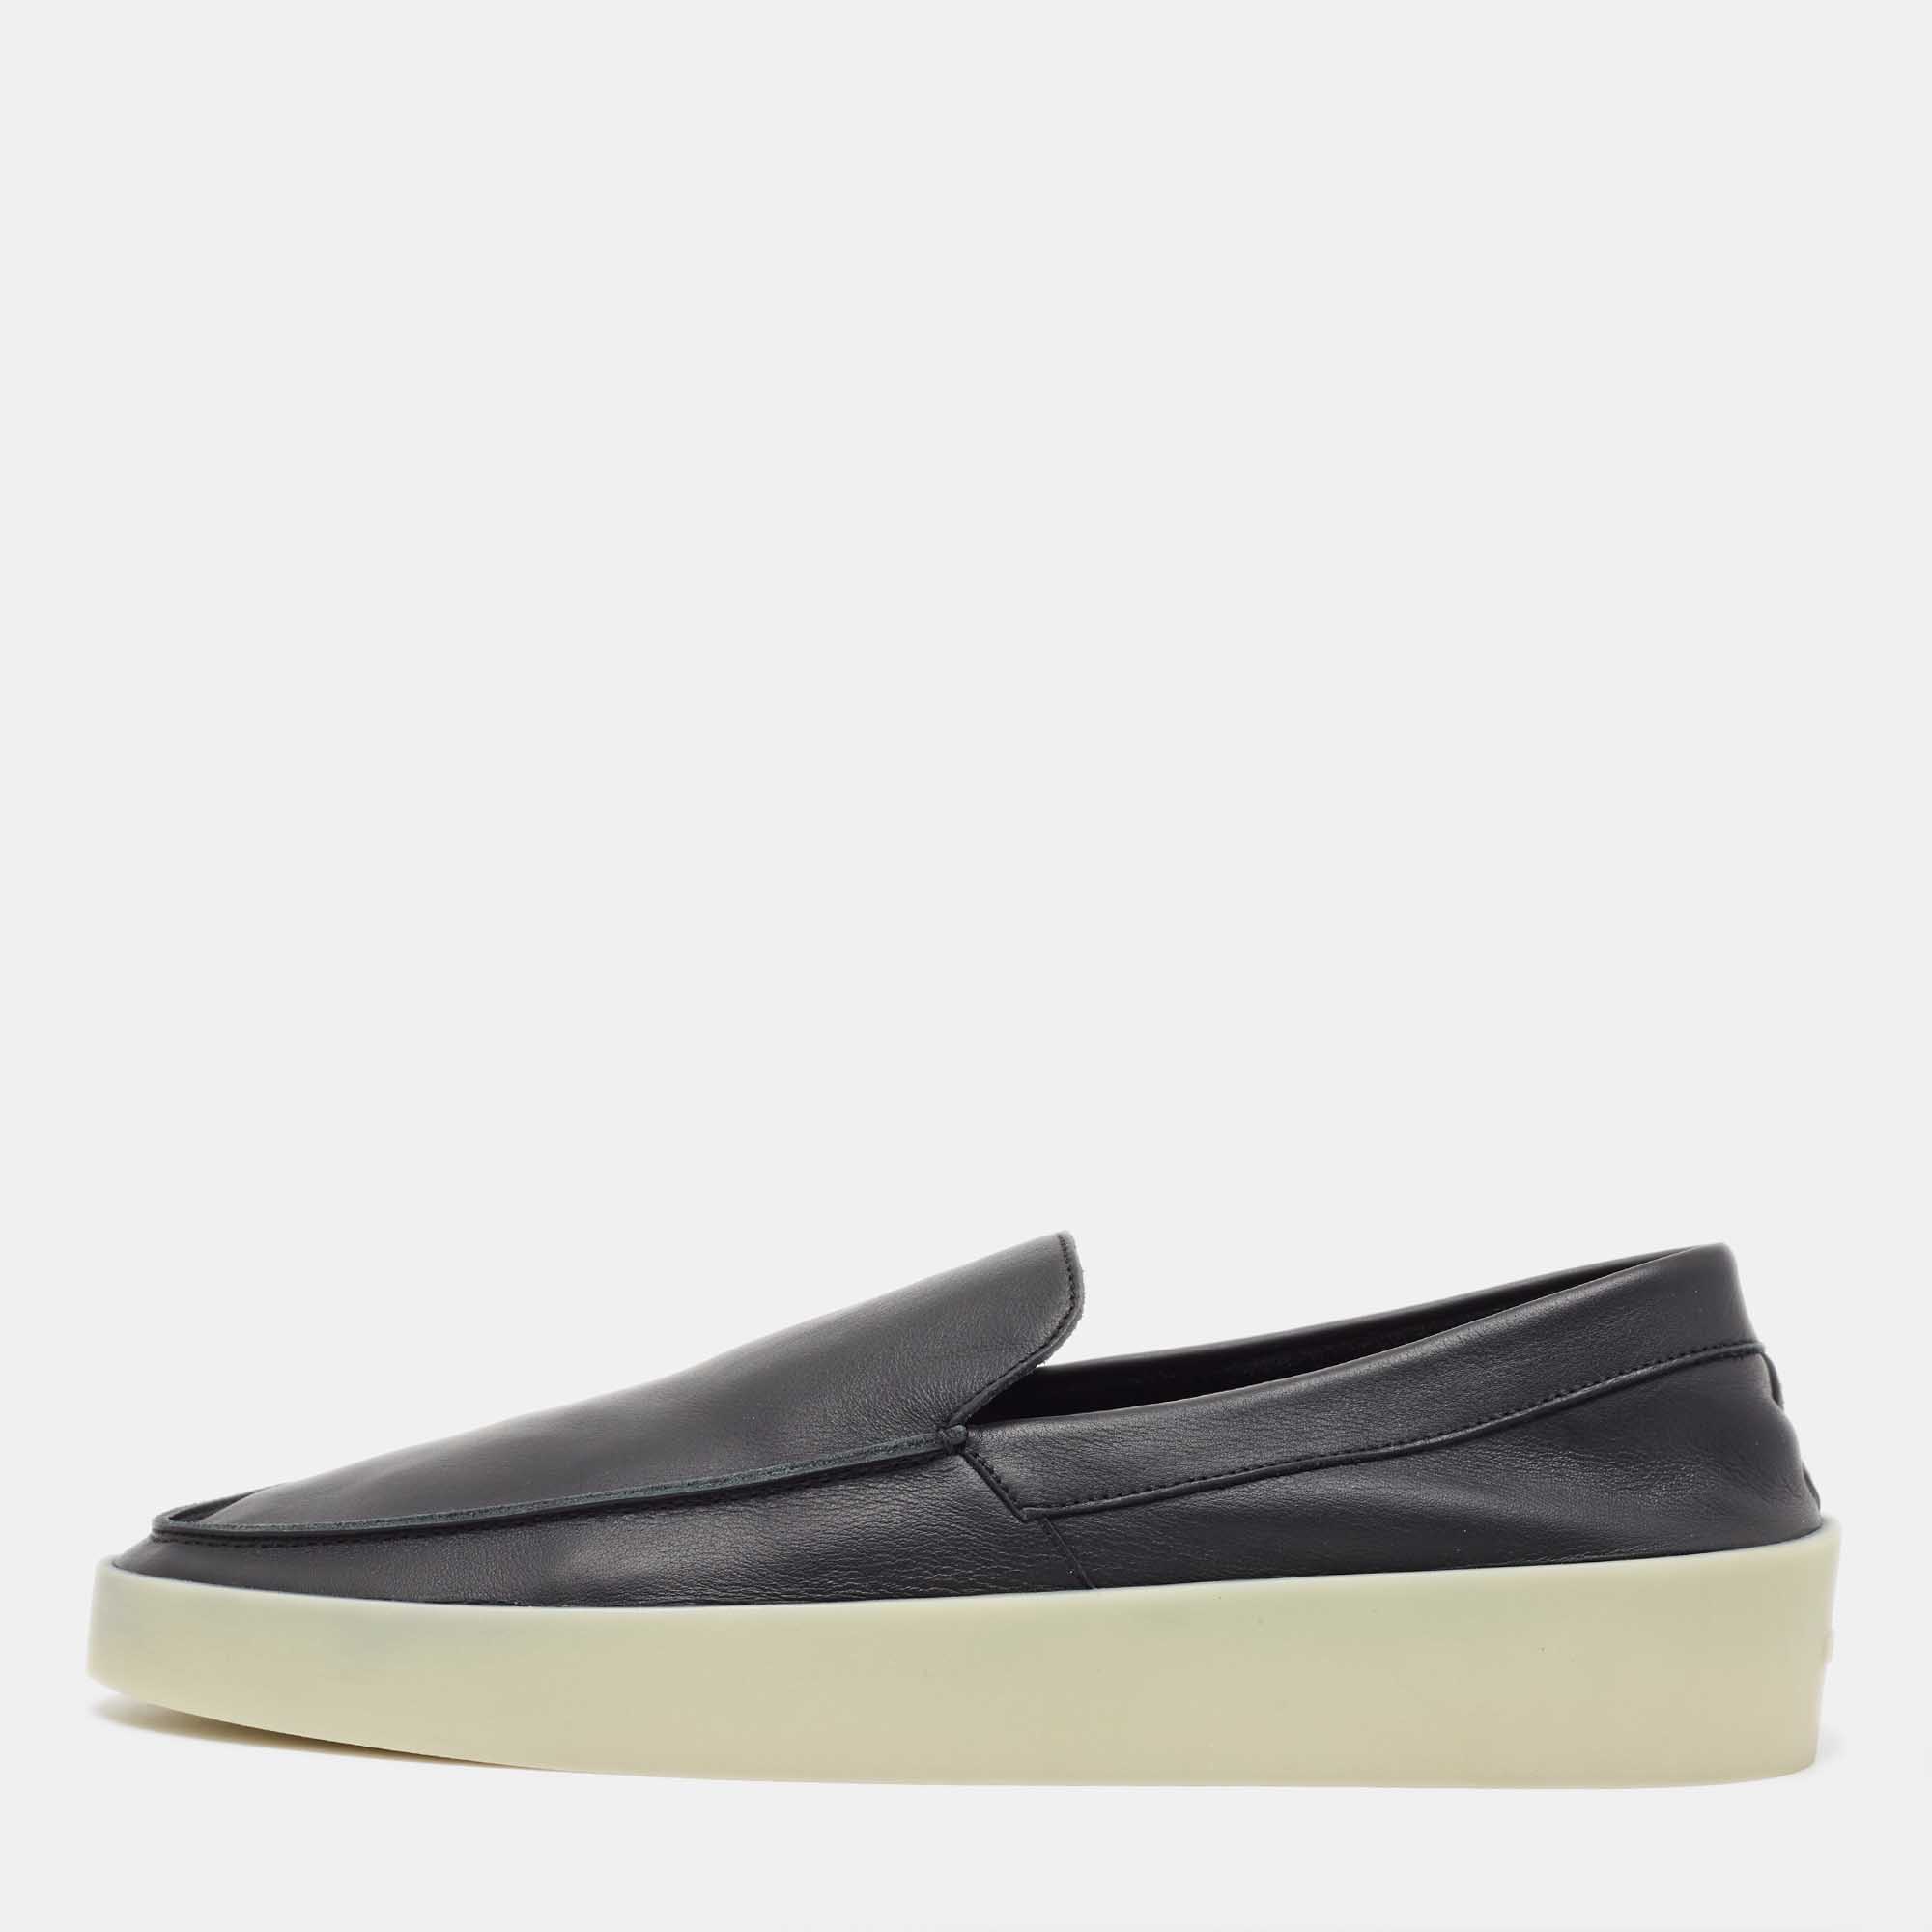 Fear Of God Black Leather Slip On Sneakers Size 46